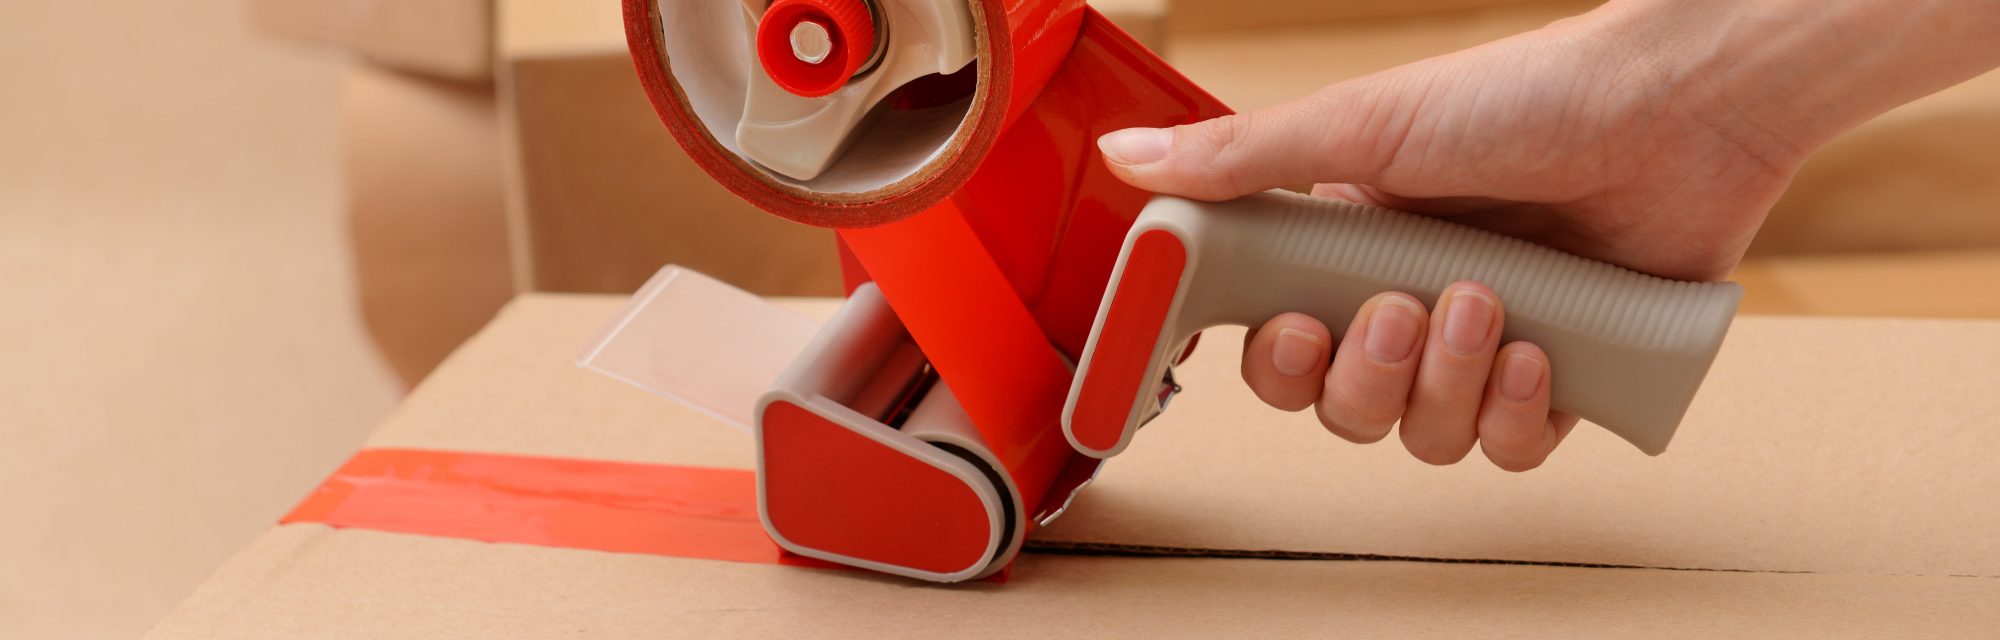 Tape dispenser packaging box with red tape